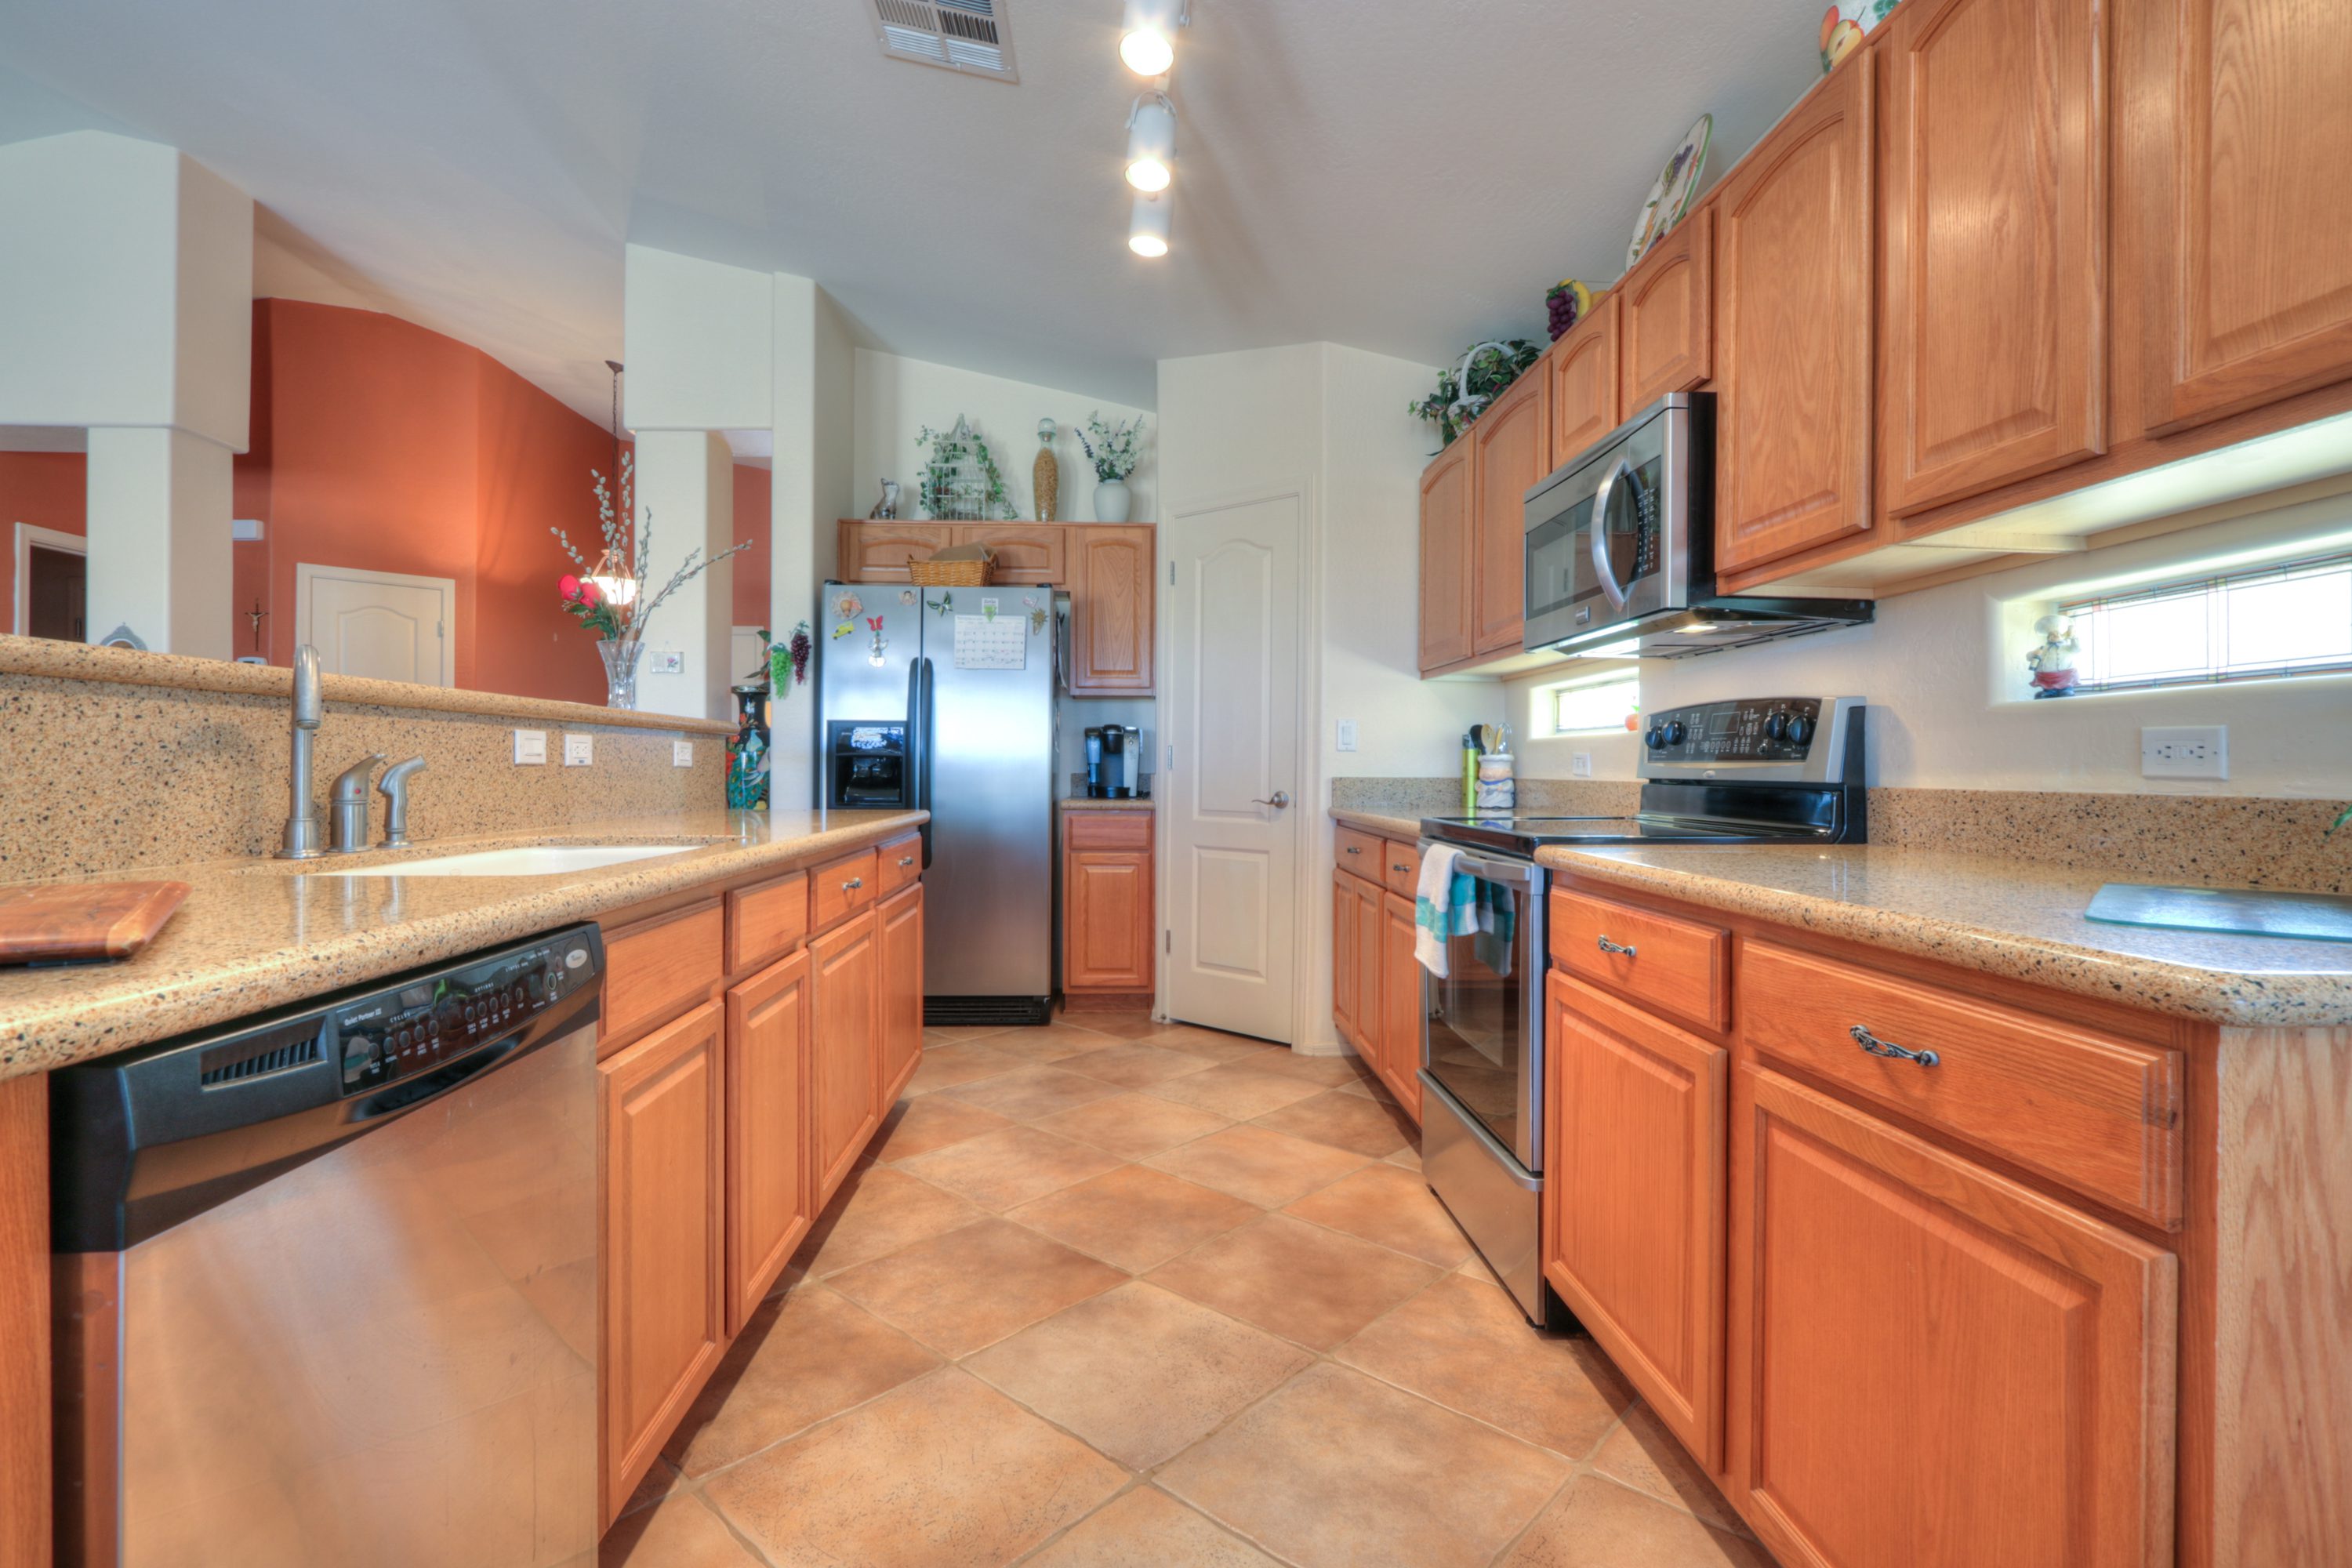 Stainless Steel Appliances, granite counter-tops